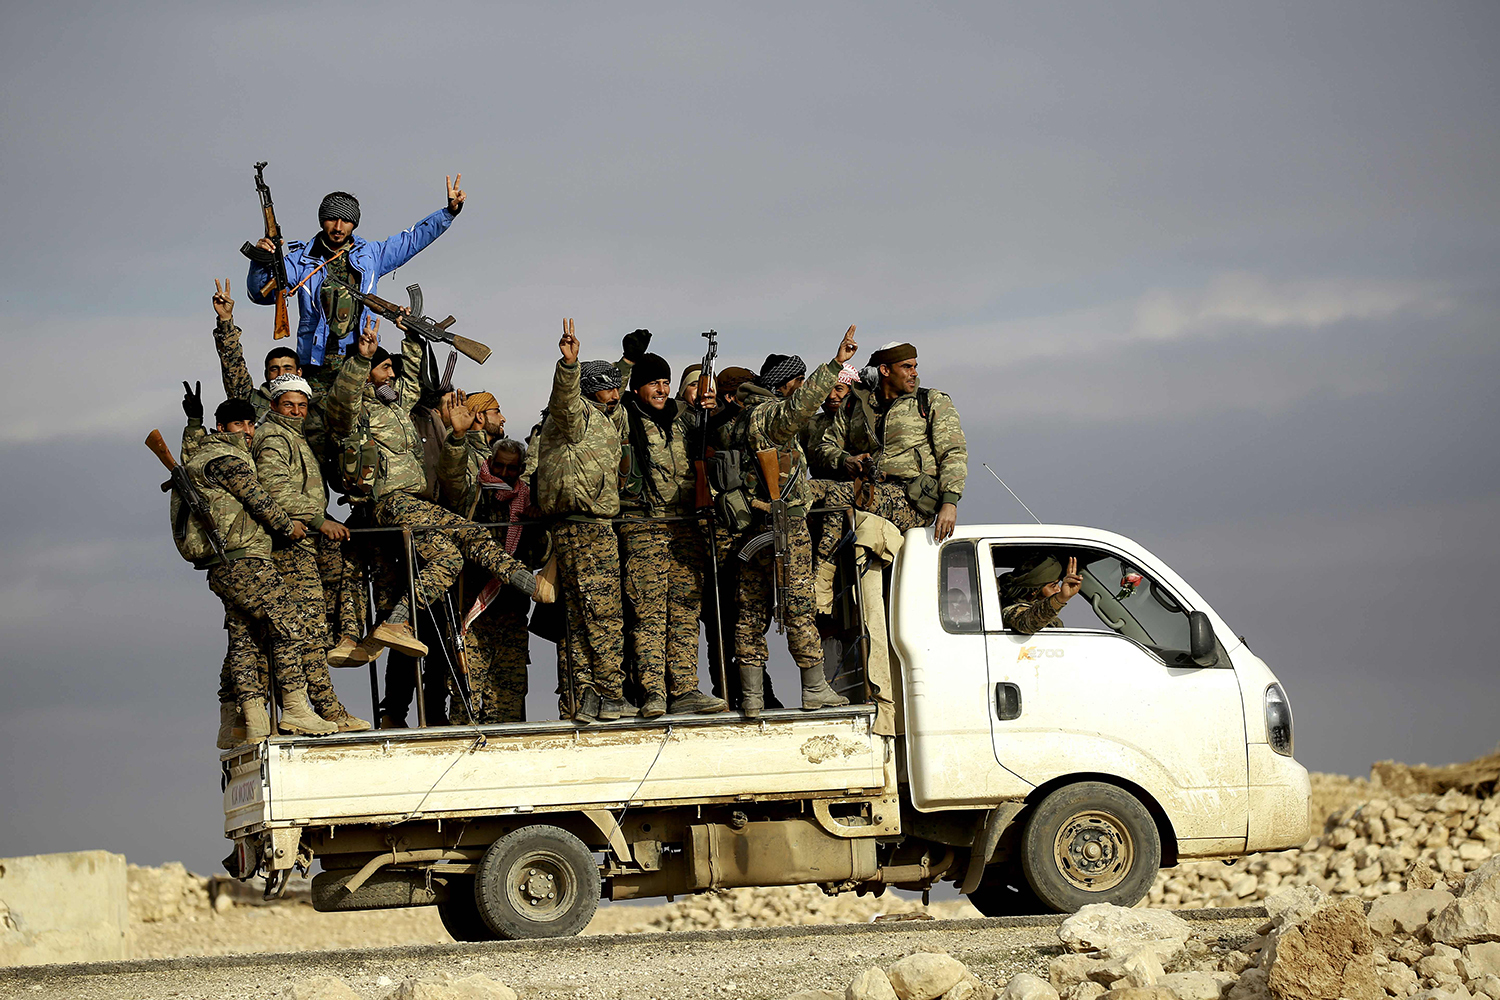 TOPSHOT - Fighters from the Kurdish-Arab alliance, known as the Syrian Democratic Forces, wave from a truck driving through the village of Al-Haymar, located on the western outskirts of the Islamic State (IS) bastion of Raqa, on December 11, 2016. The US-backed alliance announced on December 10 it would launch the second phase of its battle for the IS group's de facto Syrian capital of Raqa. / AFP PHOTO / DELIL SOULEIMAN / TT / kod 444